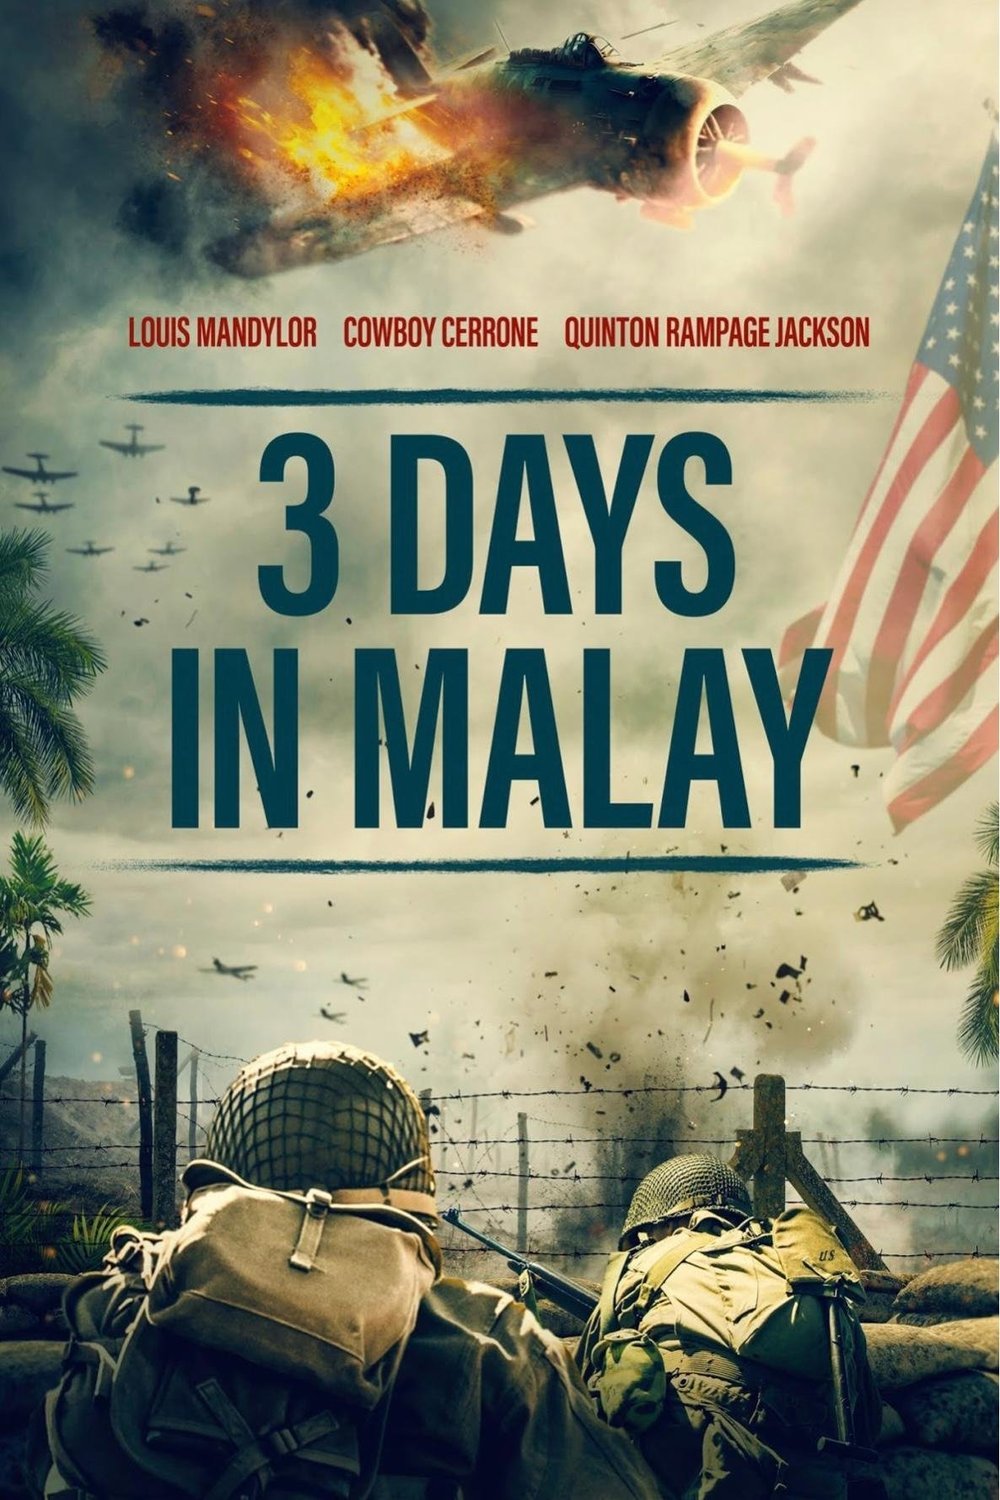 Poster of the movie 3 Days in Malay